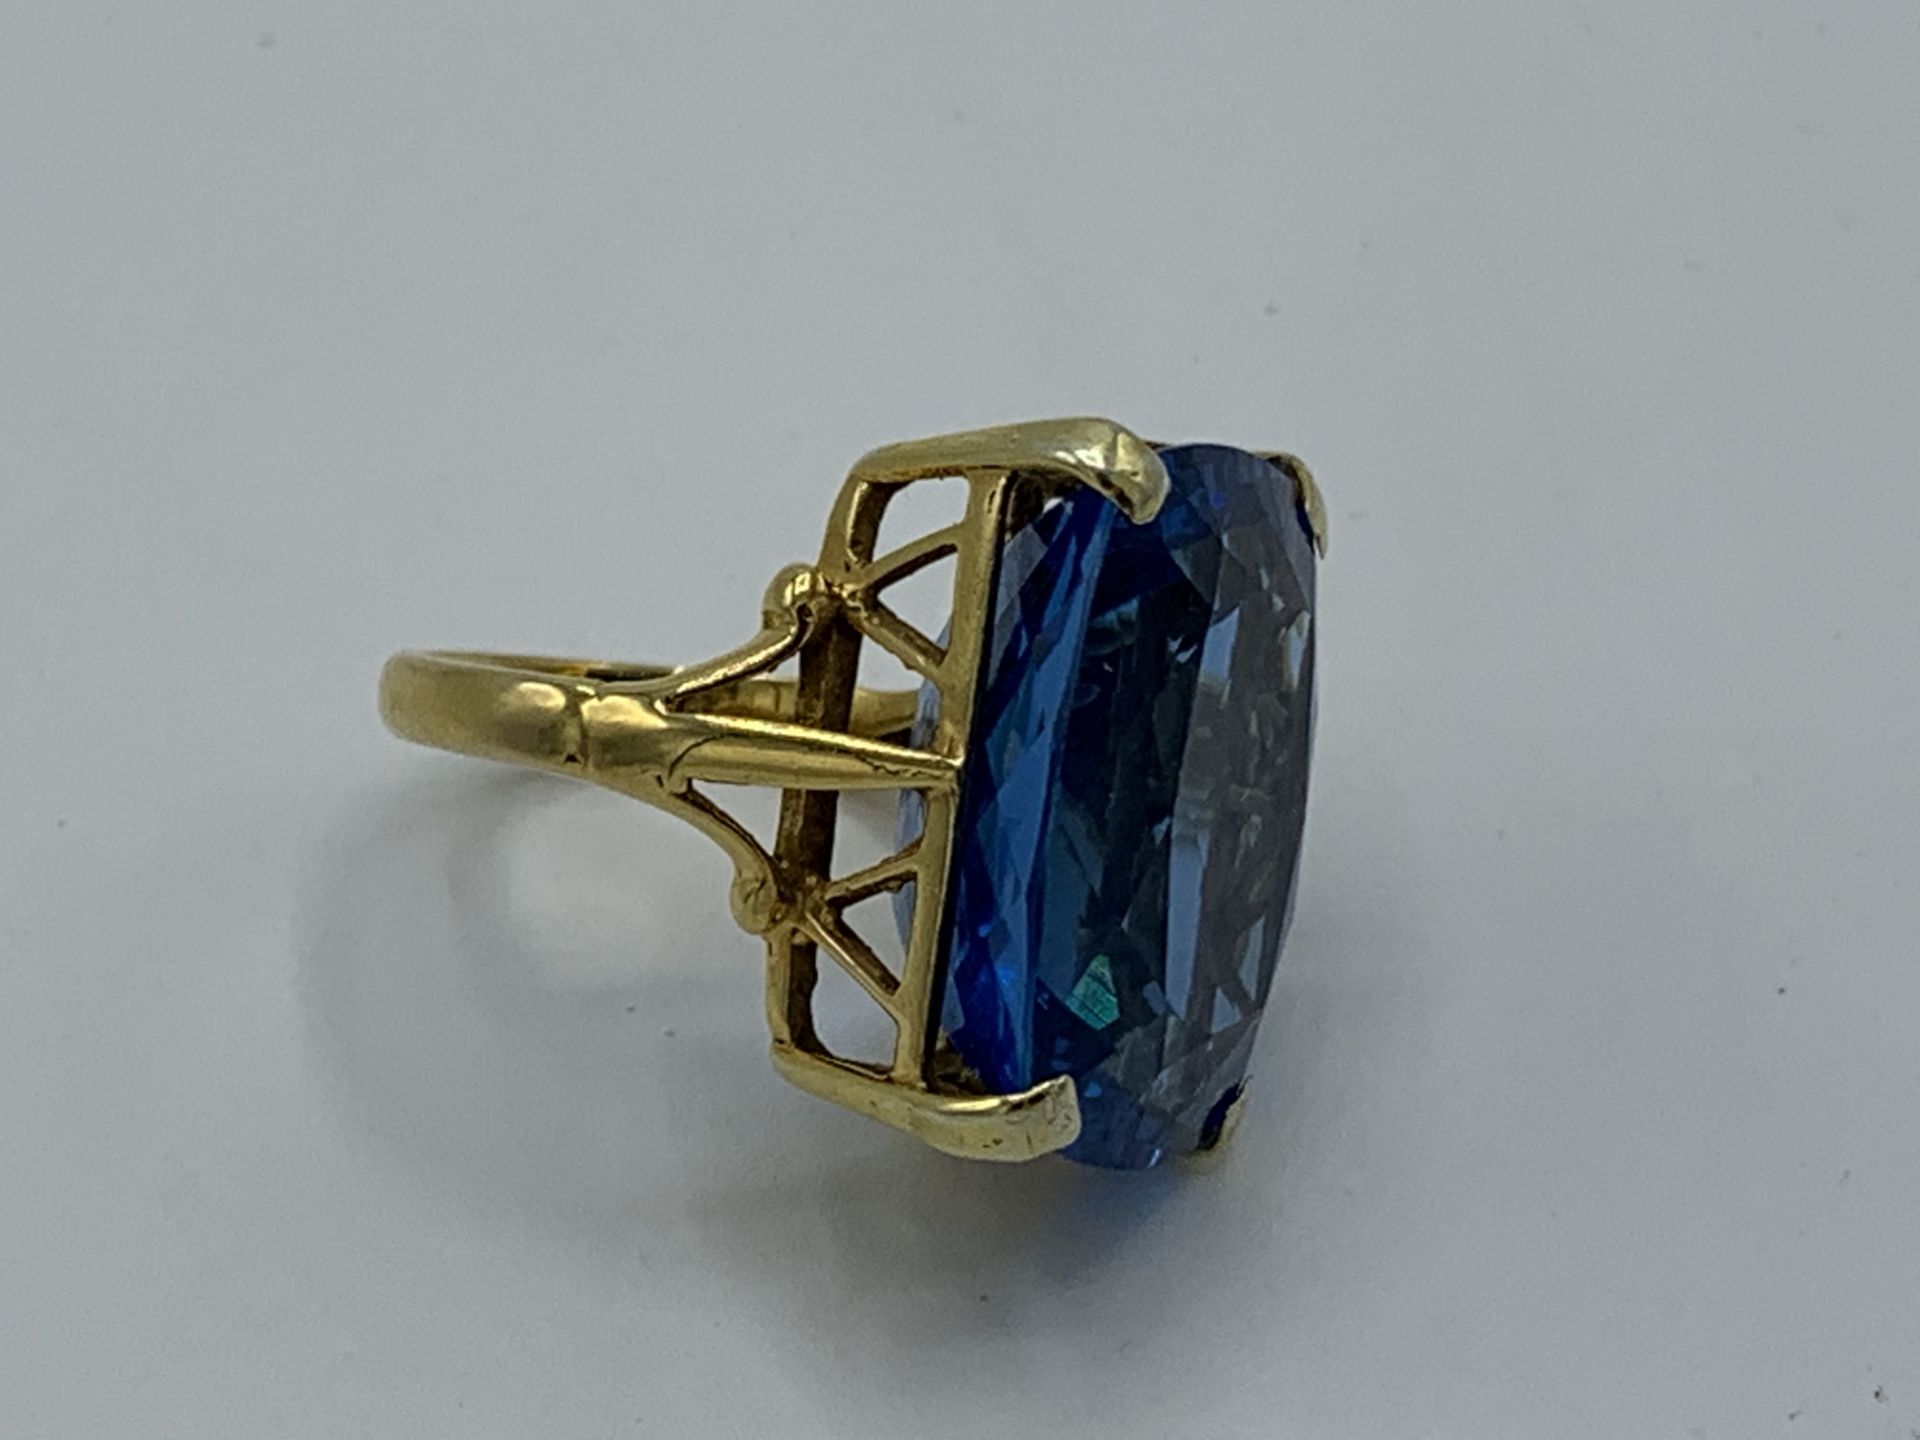 9ct gold and London blue Topaz ring 9.9gms, size H, stone 2 x 1.5cms. Estimate £500-600. - Image 2 of 3